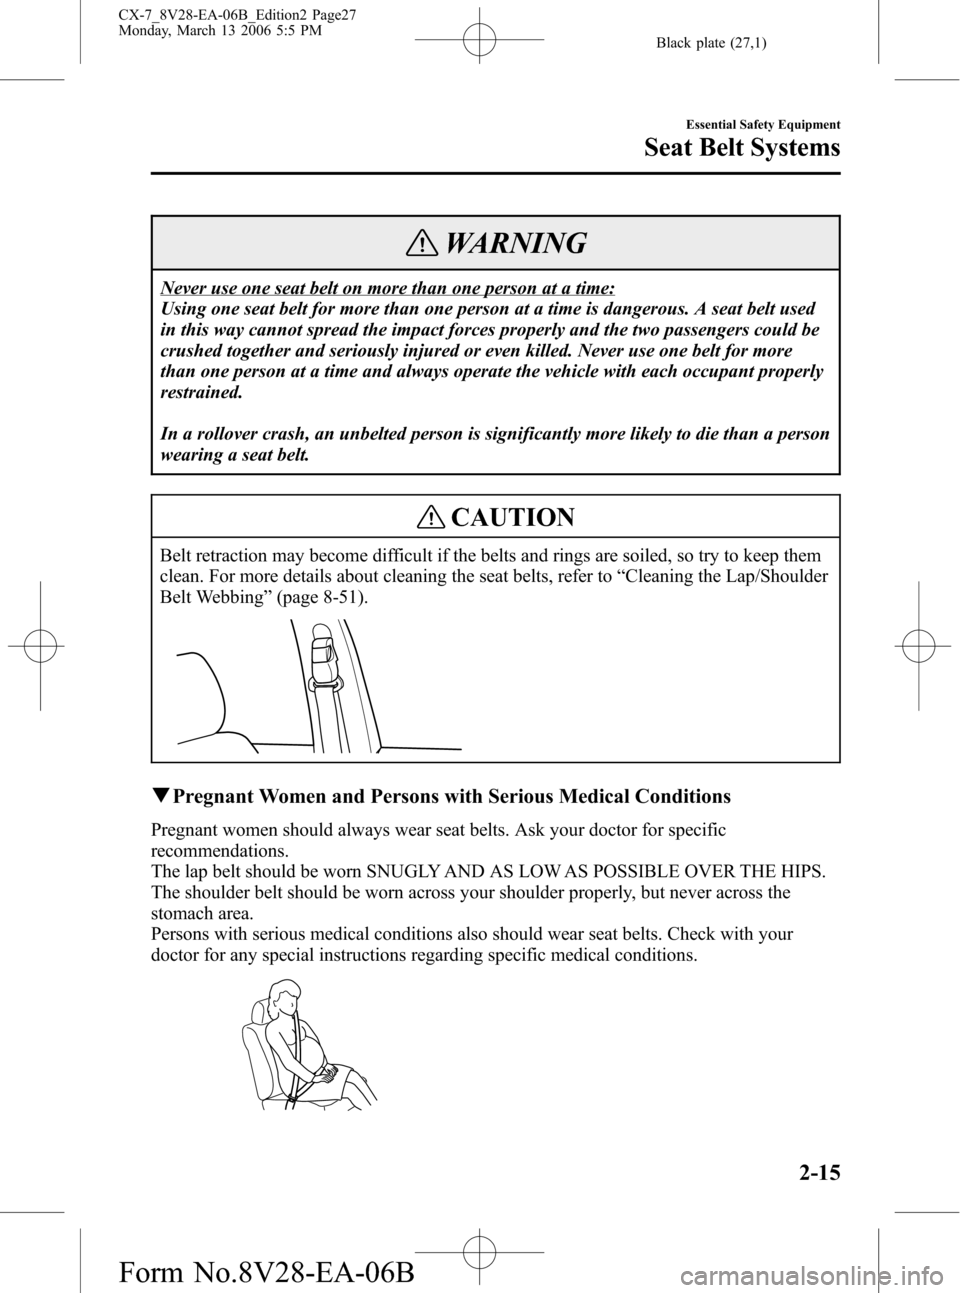 MAZDA MODEL CX-7 2007   (in English) Owners Manual Black plate (27,1)
WARNING
Never use one seat belt on more than one person at a time:
Using one seat belt for more than one person at a time is dangerous. A seat belt used
in this way cannot spread th